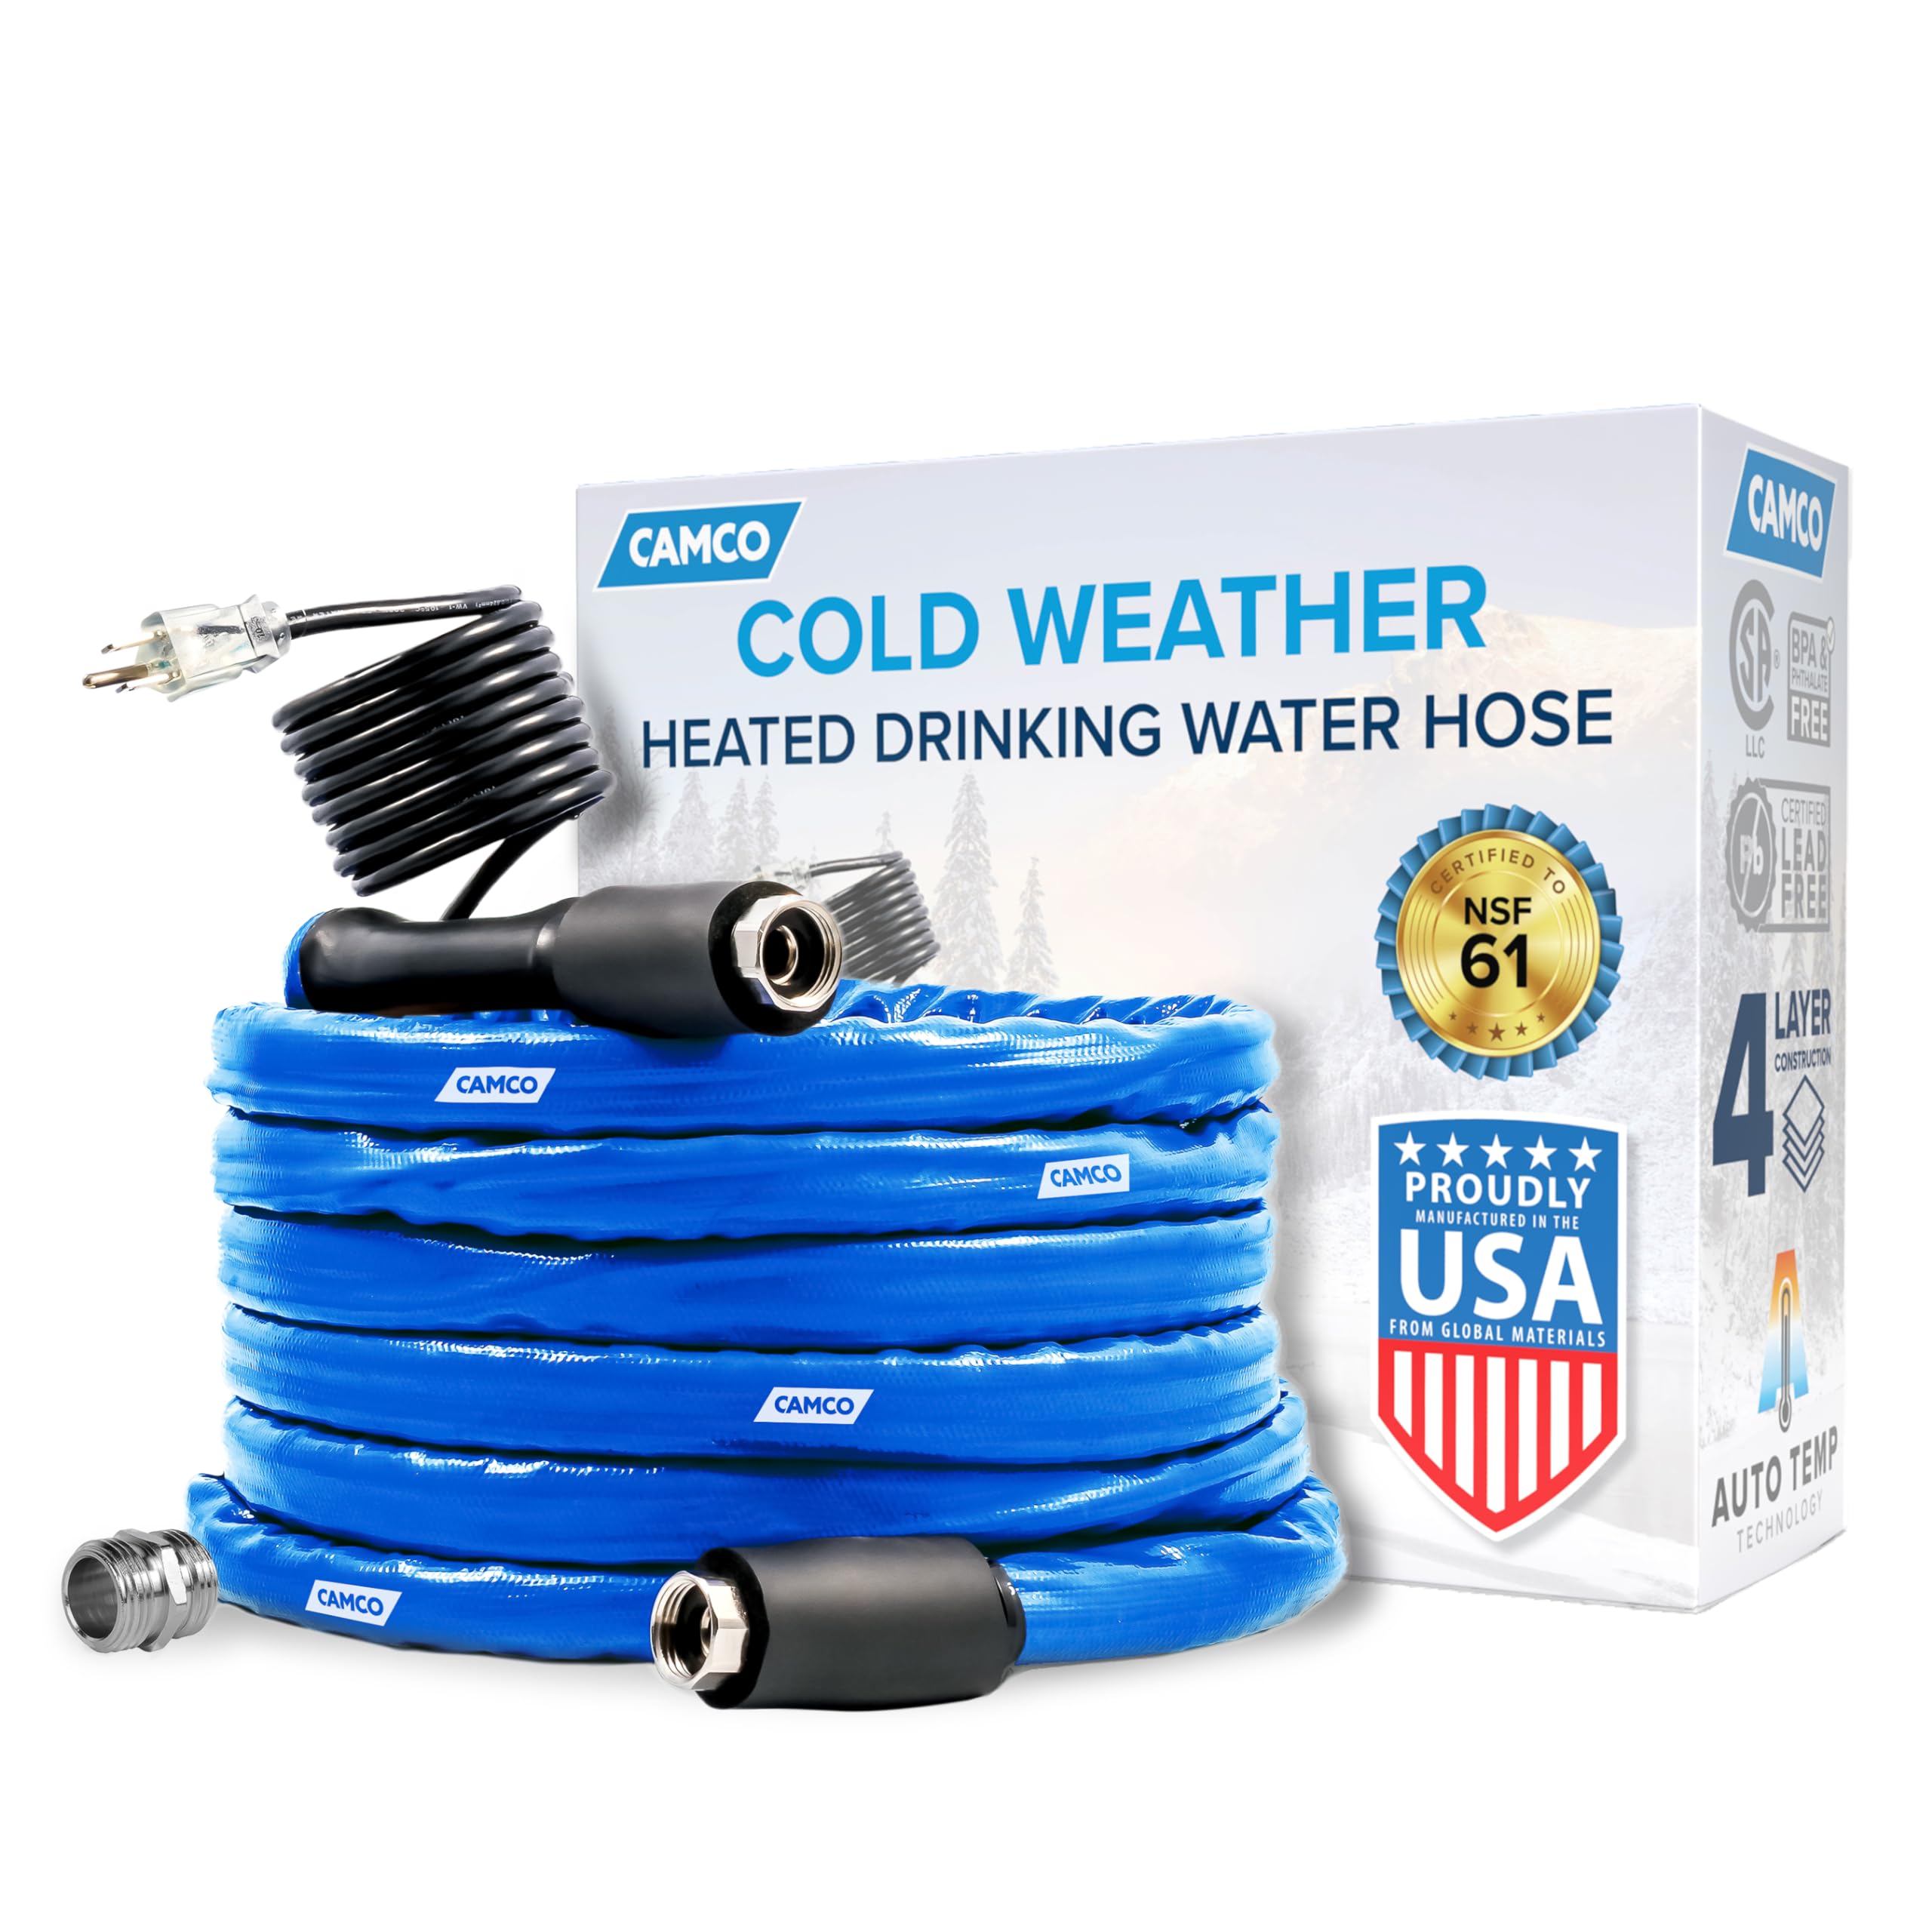 Camco 25-Foot Heated Drinking Water Hose | Features Wat...